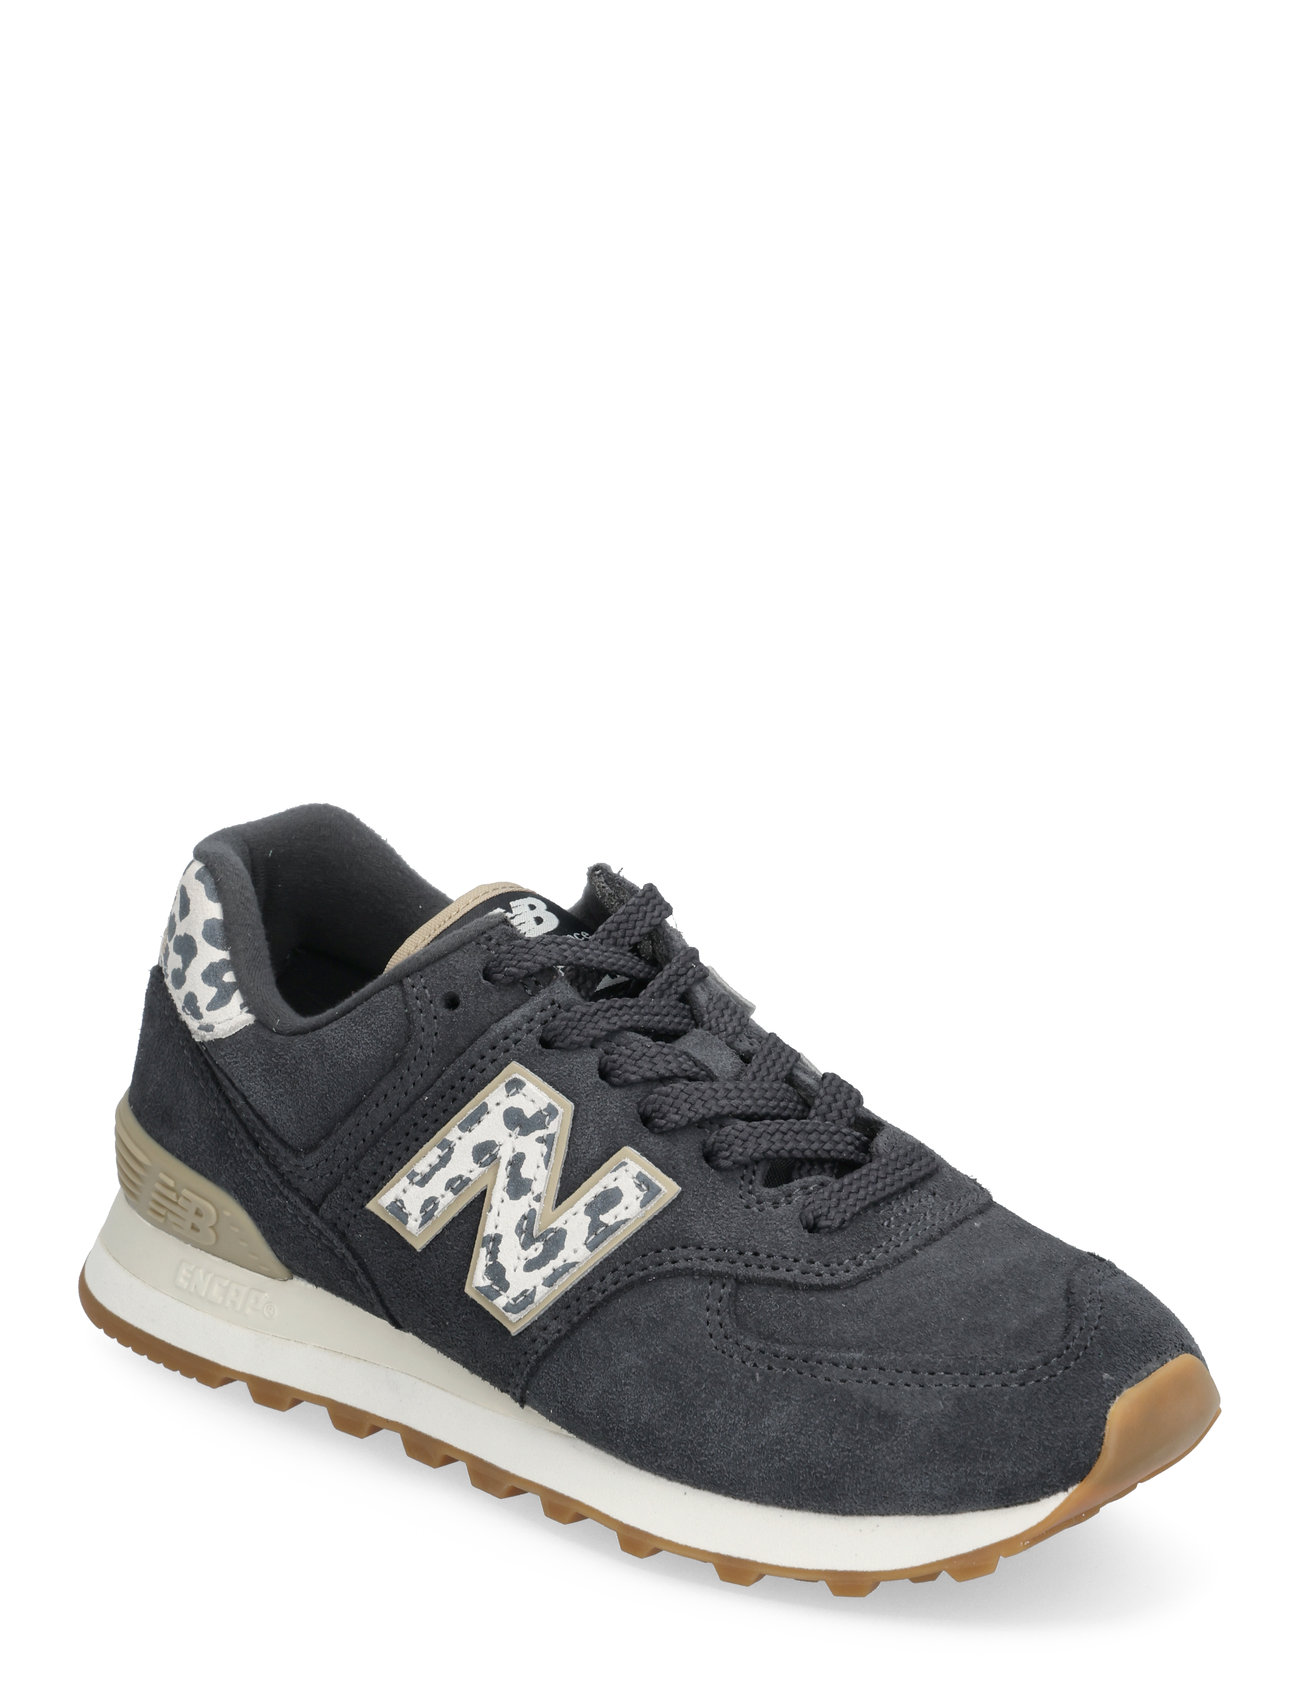 New Balance 574 Sport Sneakers Low-top Sneakers Black New Balance